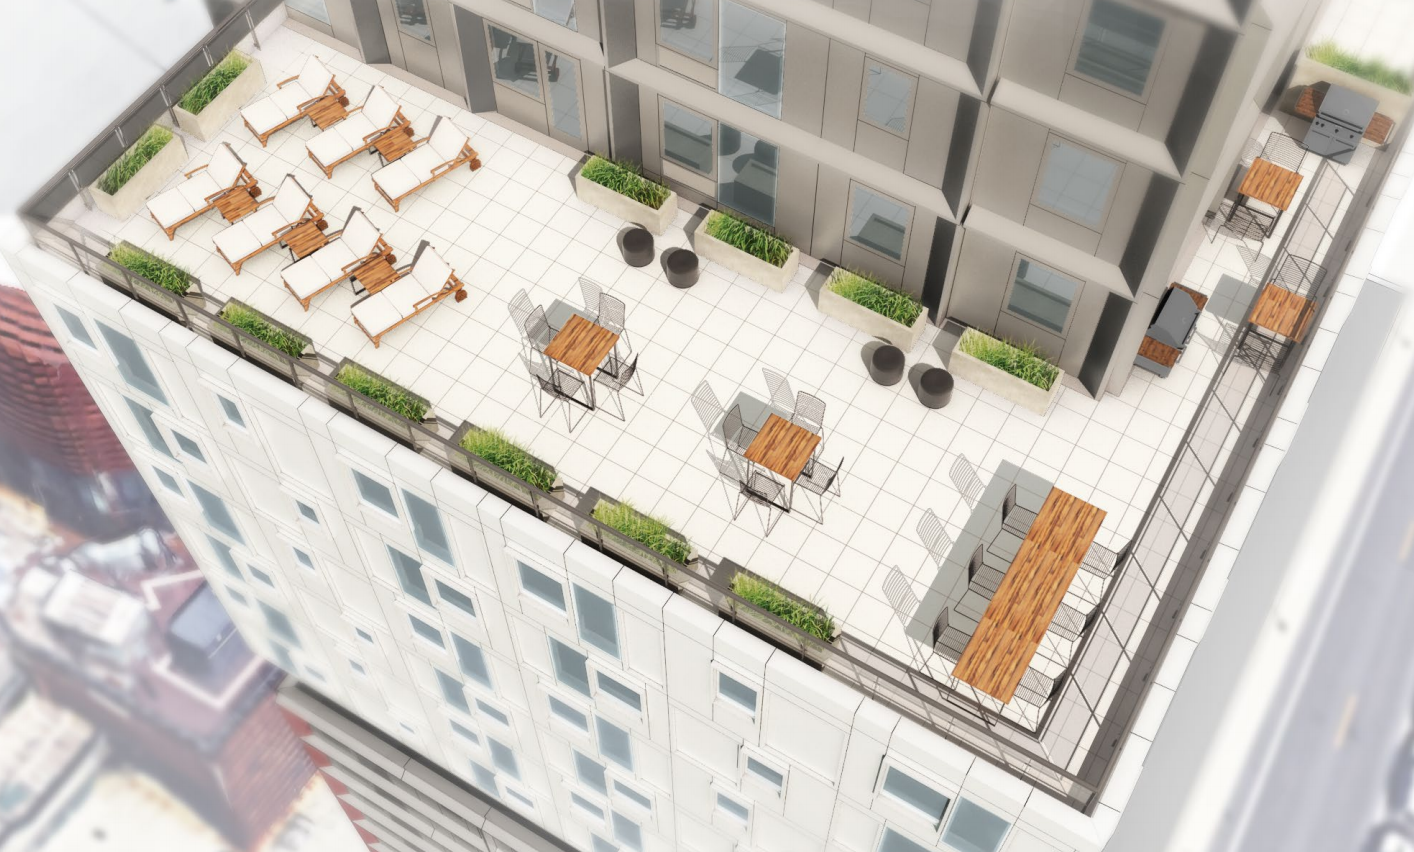 Roof deck at 38 Sixth Avenue, rendering by SHoP Architects